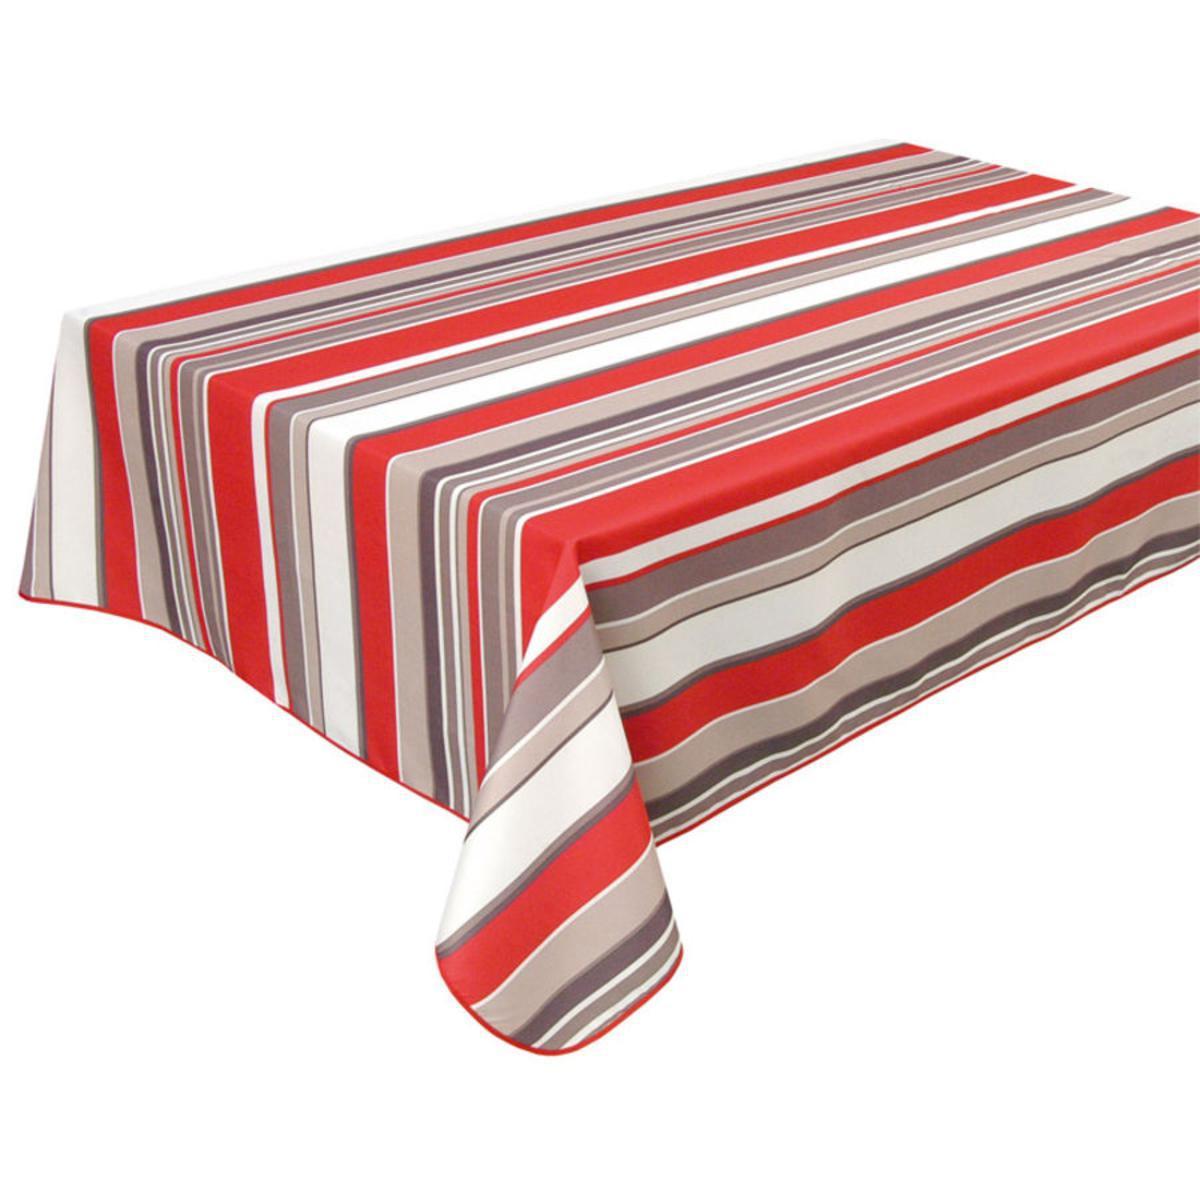 Nappe rectangulaire- Polyester - 140 x 240 cm - Rouge Gis Blanc